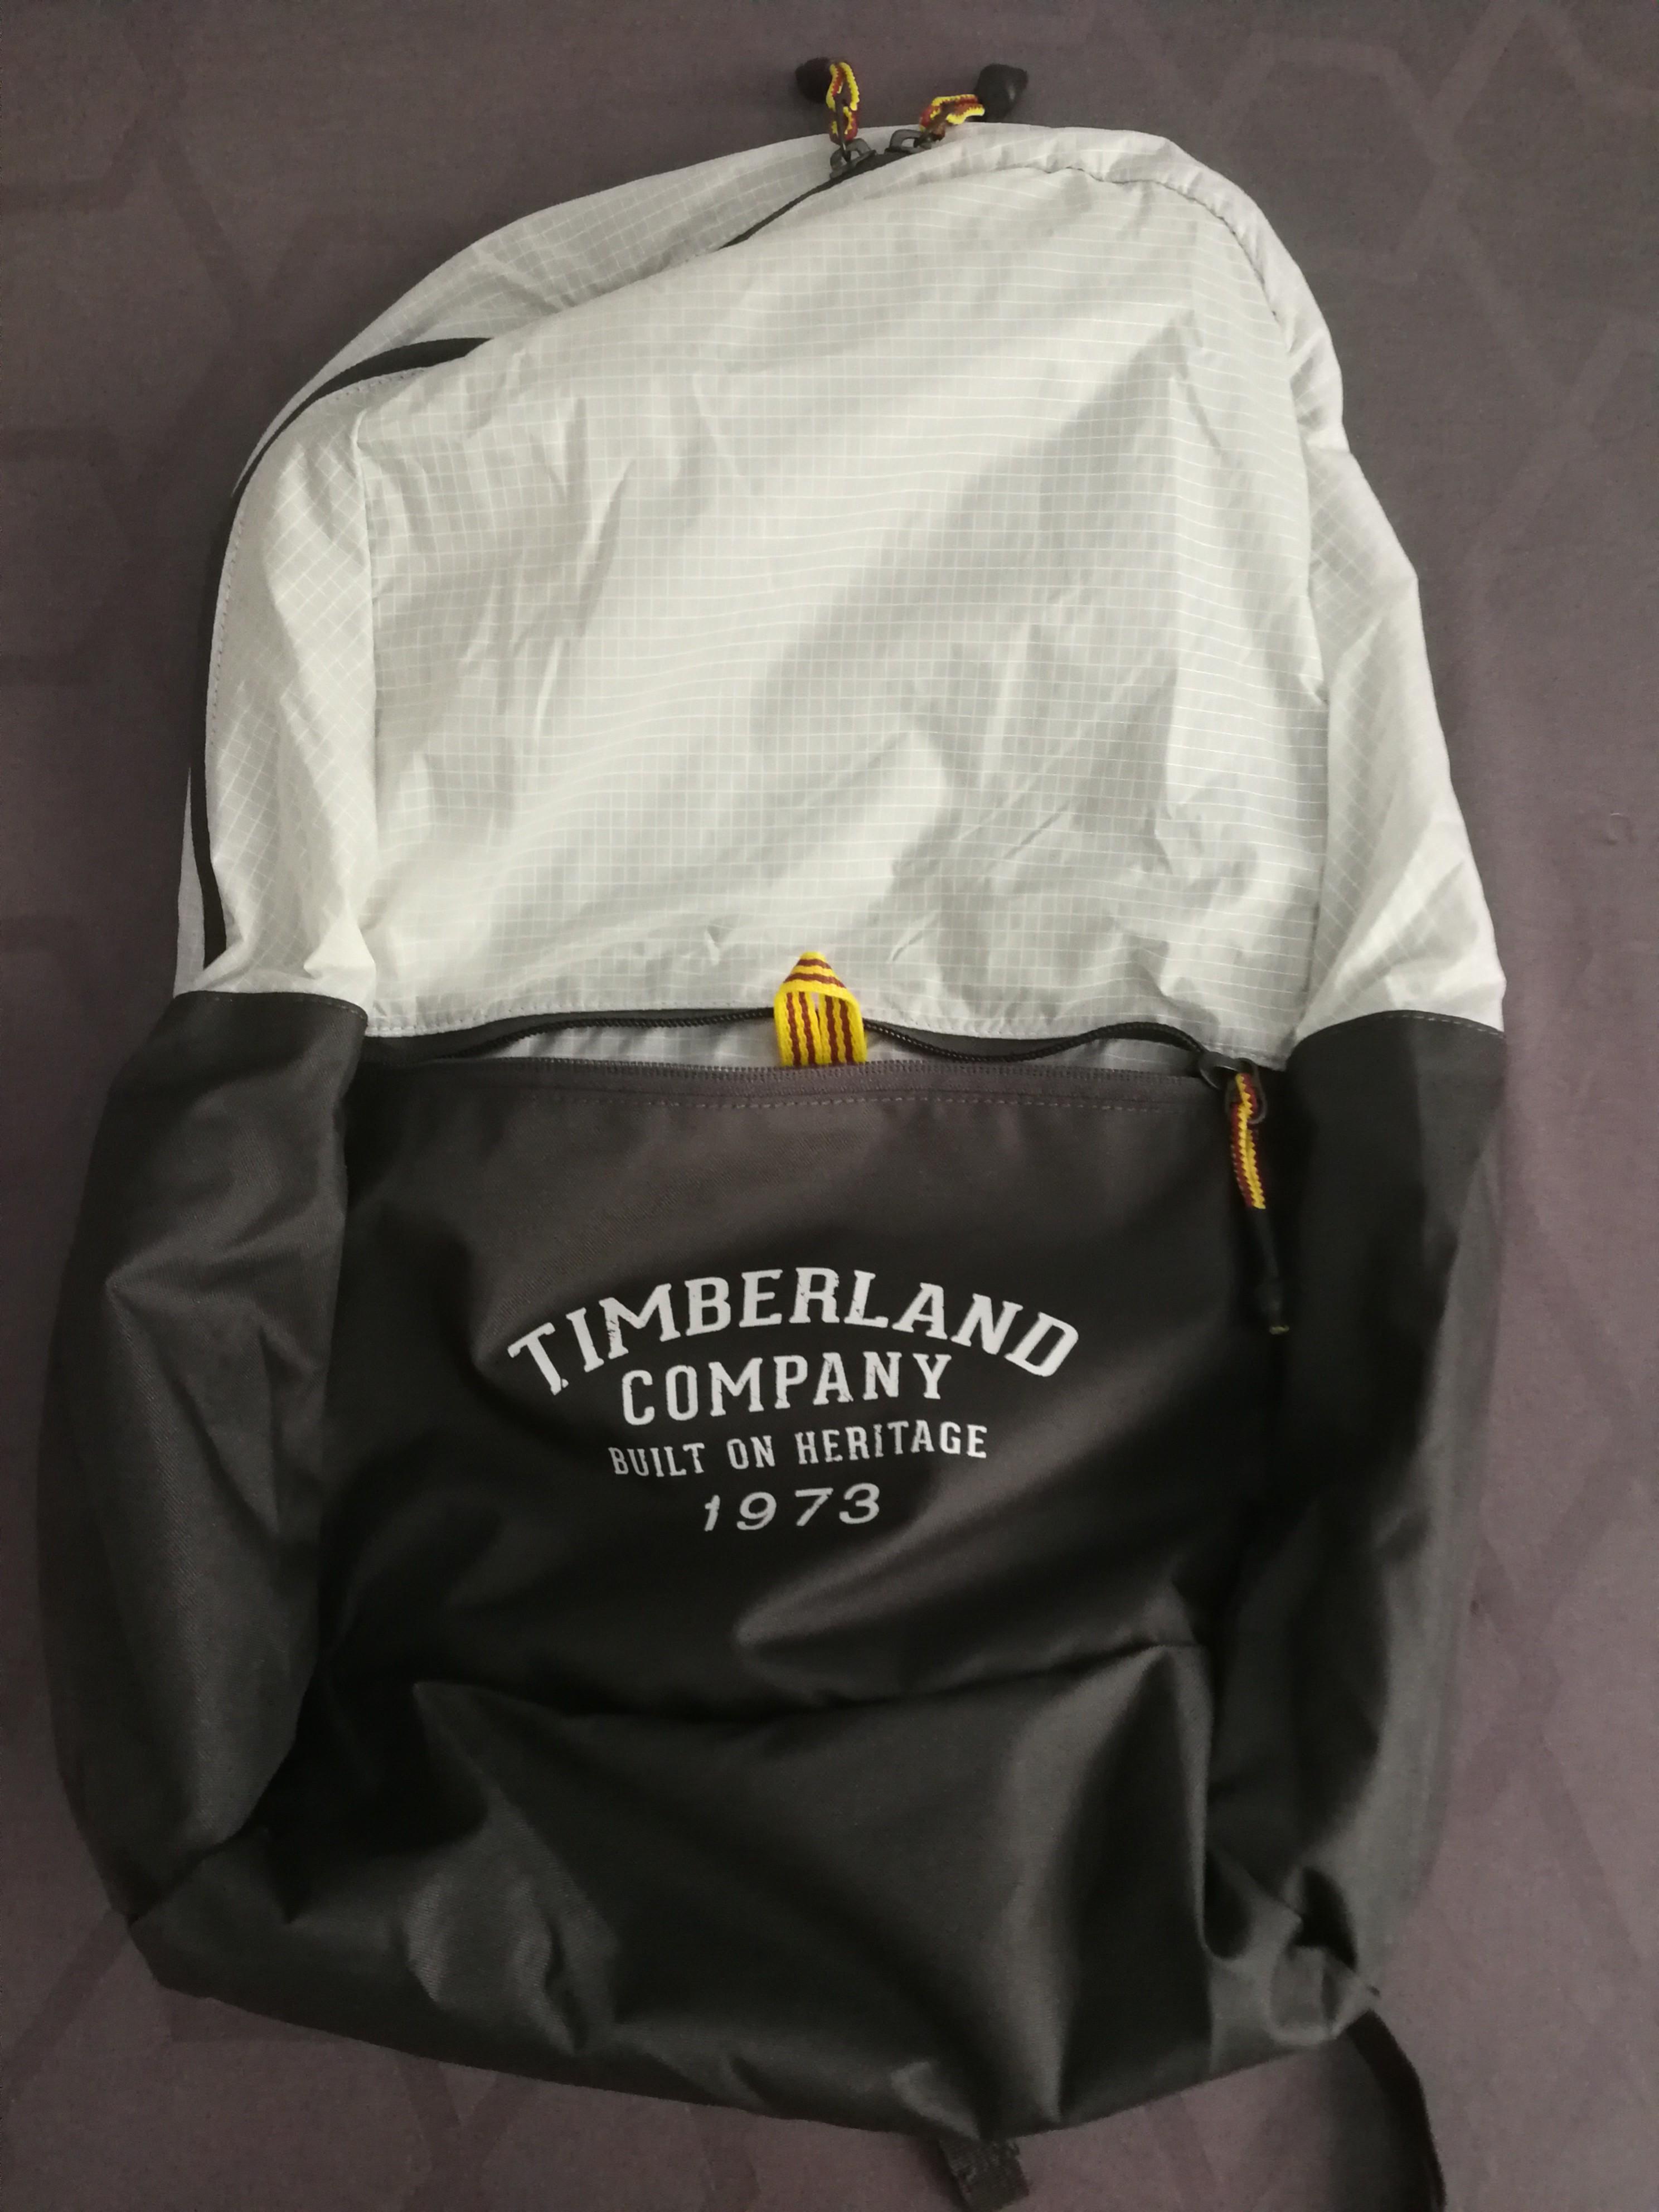 timberland packable backpack